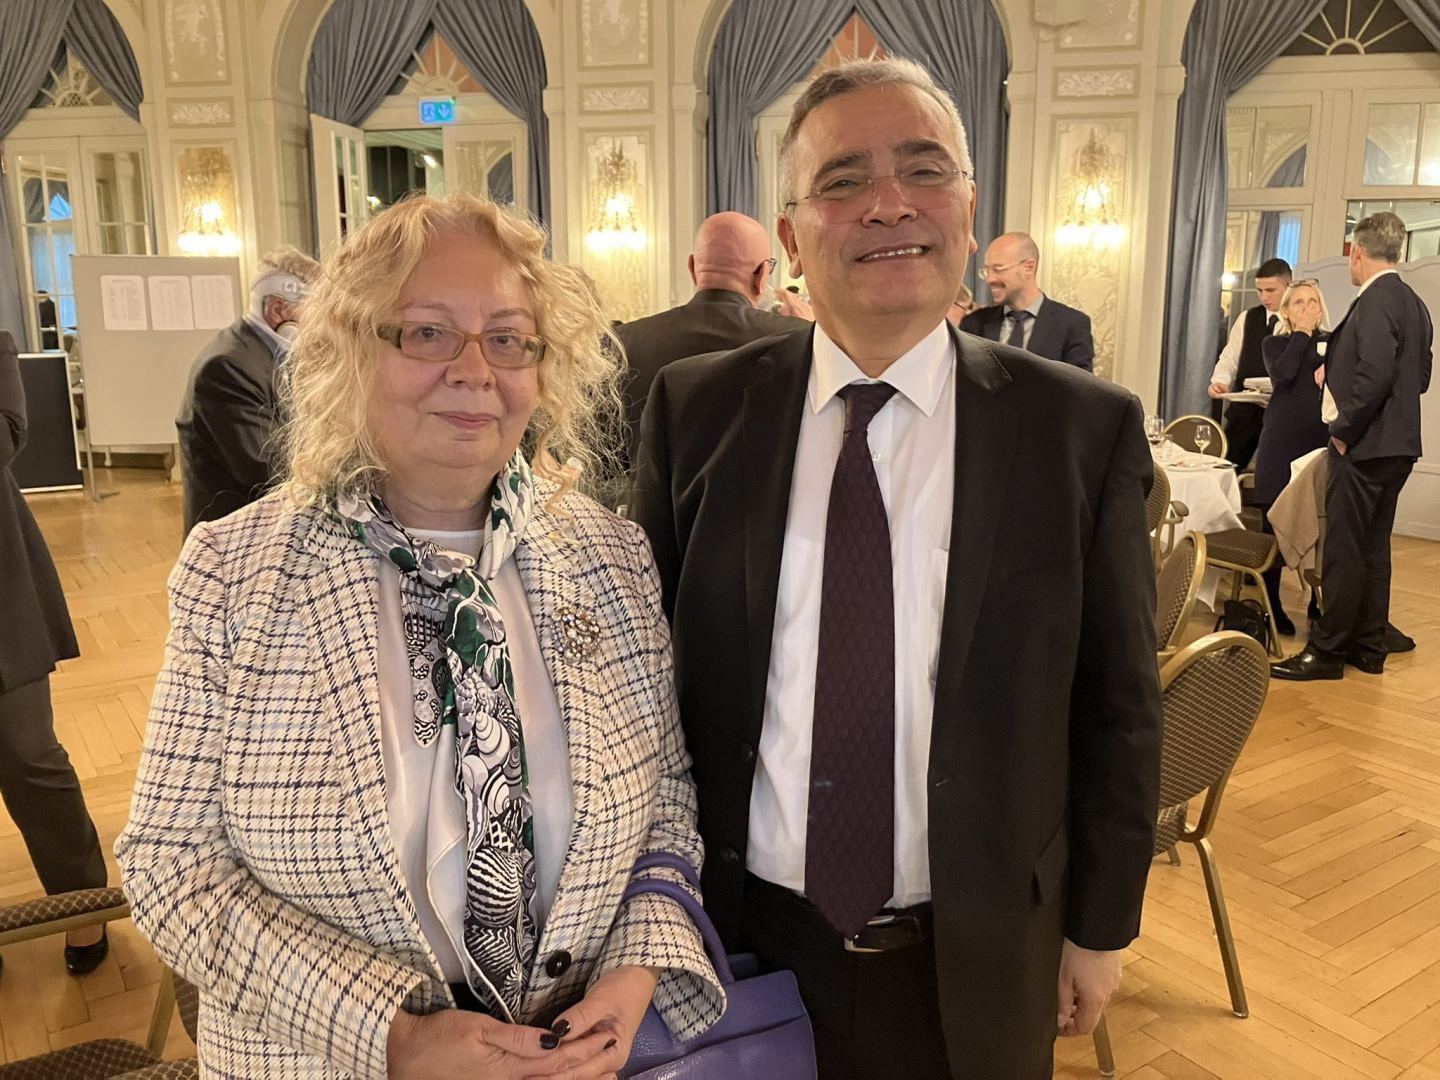 Azerbaijani envoy to Switzerland attends lunch in honor of Swiss President [PHOTO]